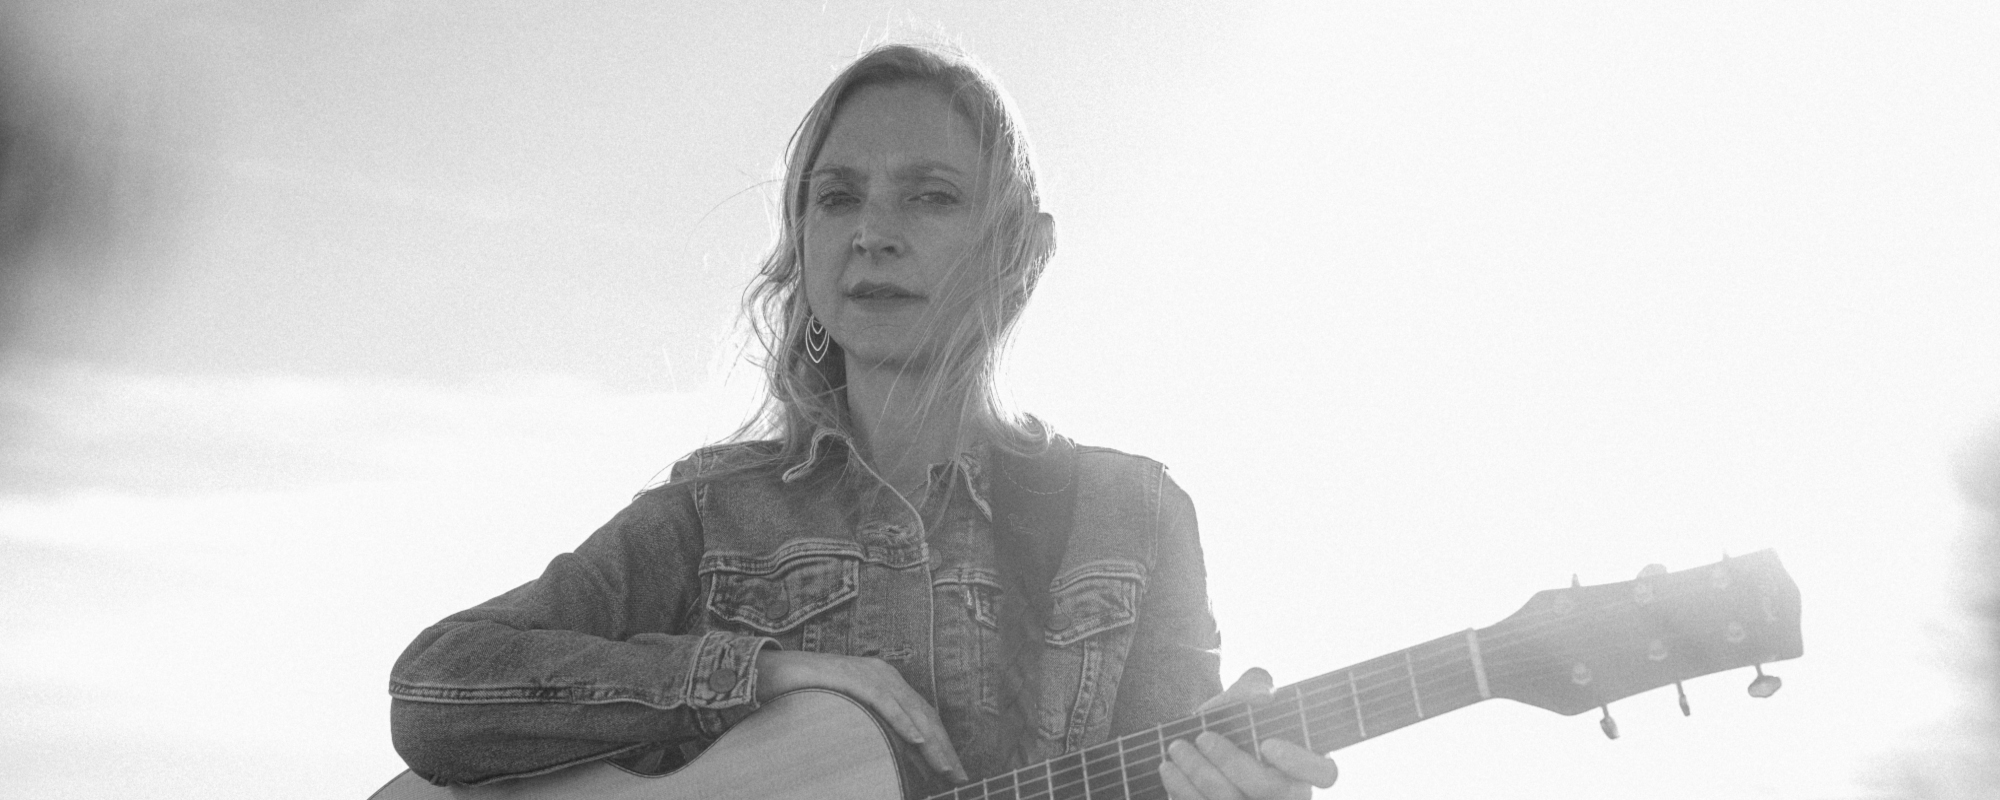 Review: After a Tumultuous Few Years, Eilen Jewell Drives Her Diverse Noir Roots on ‘Get Behind the Wheel’